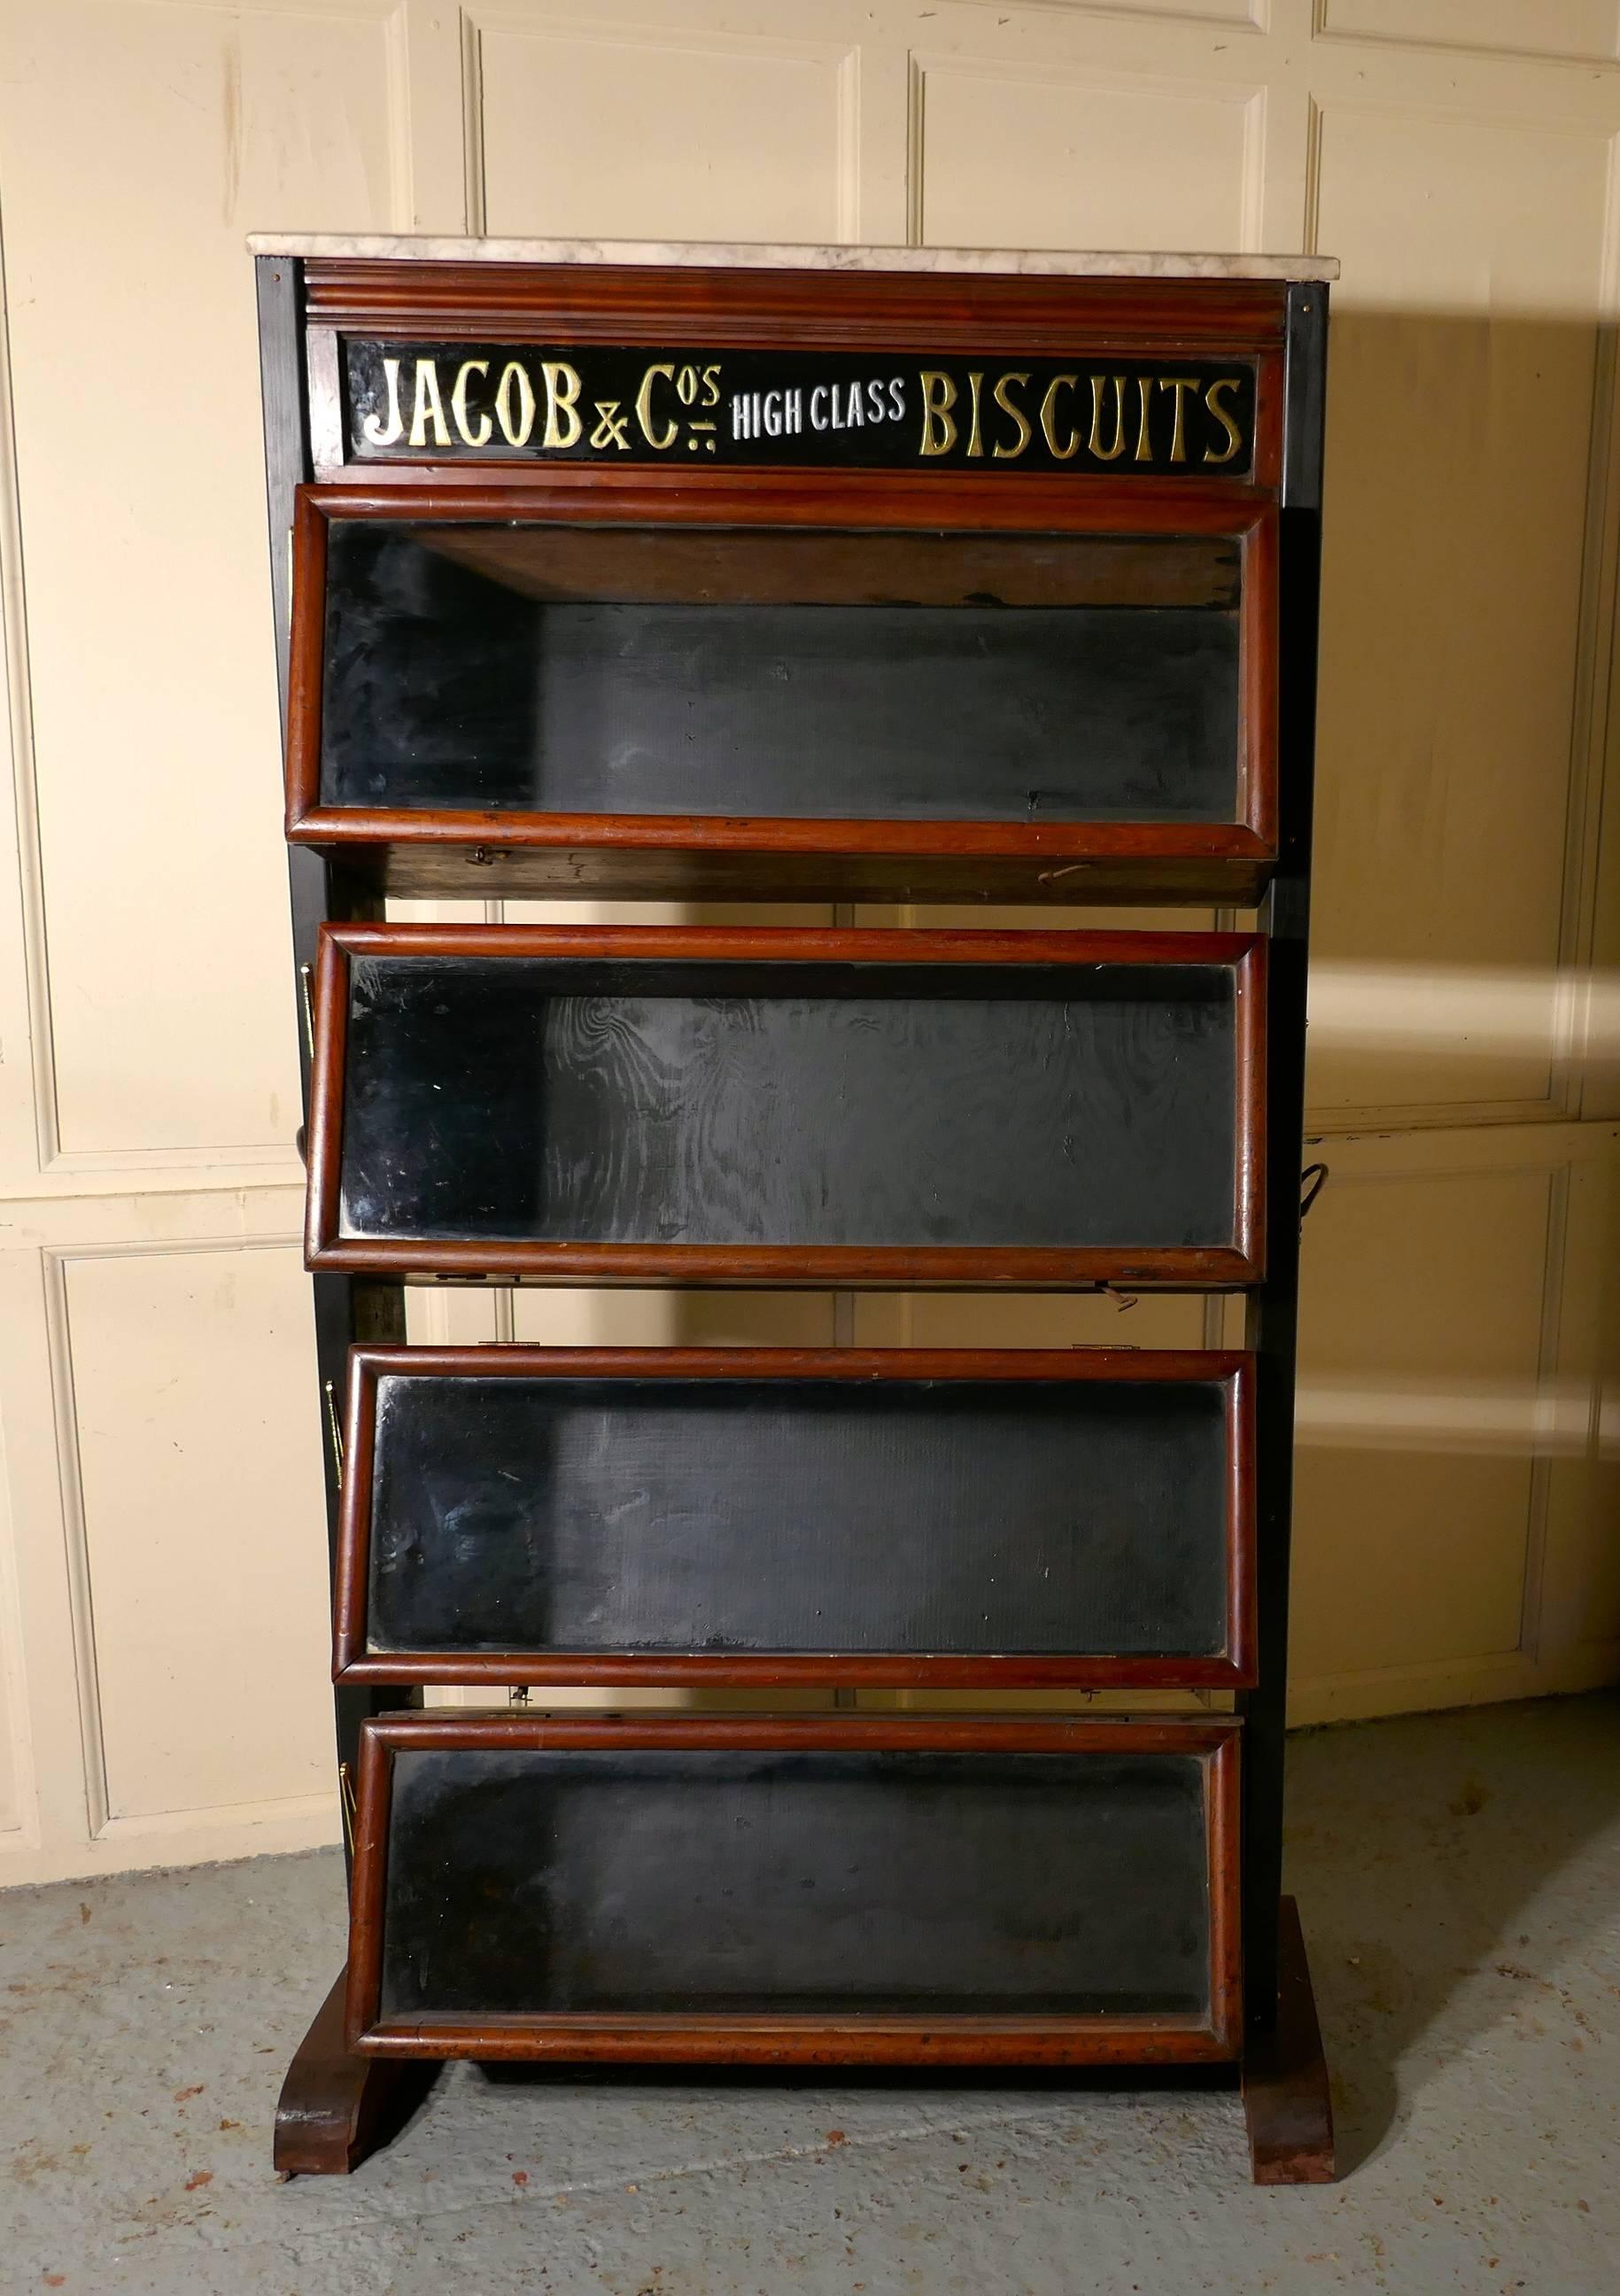 Jacob & Co’s High Class Biscuits Shop Display Cabinet  3